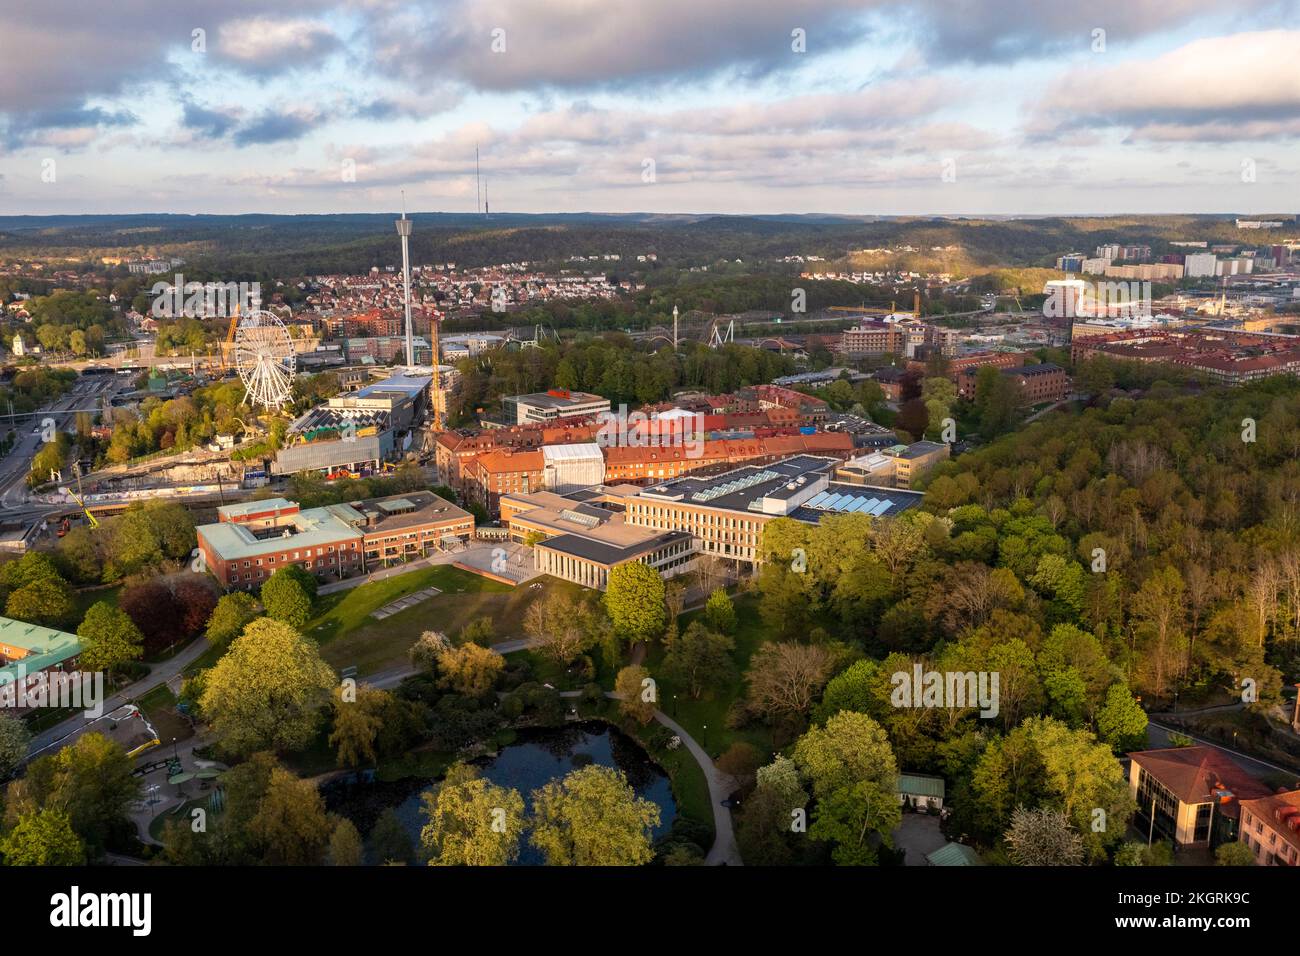 Sweden, Vastra Gotaland County, Gothenburg, Aerial view of Johanneberg district with Liseberg amusement park in background Stock Photo